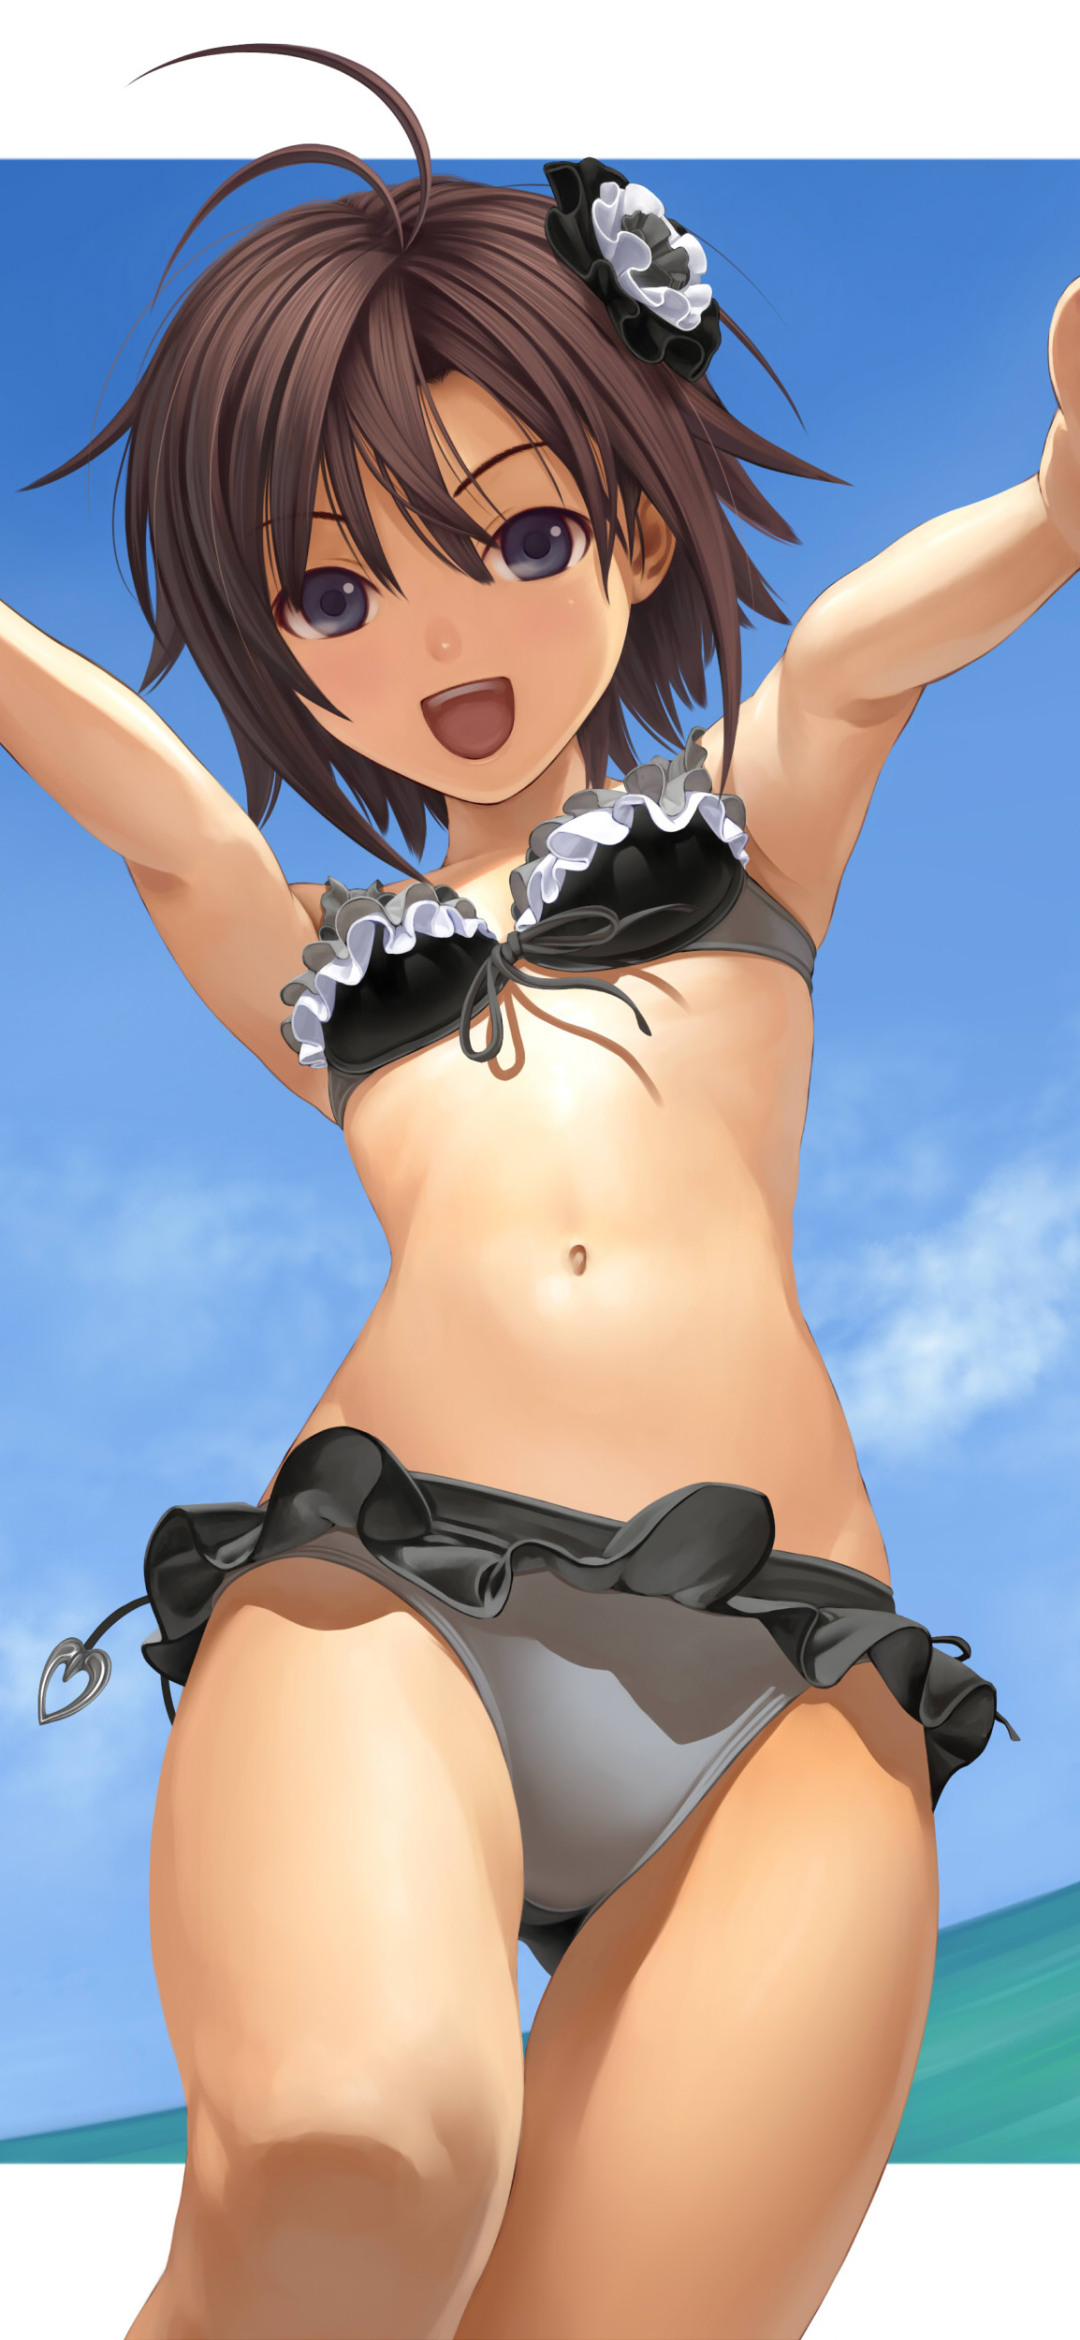 Anime The iDOLM@STER Phone Wallpaper